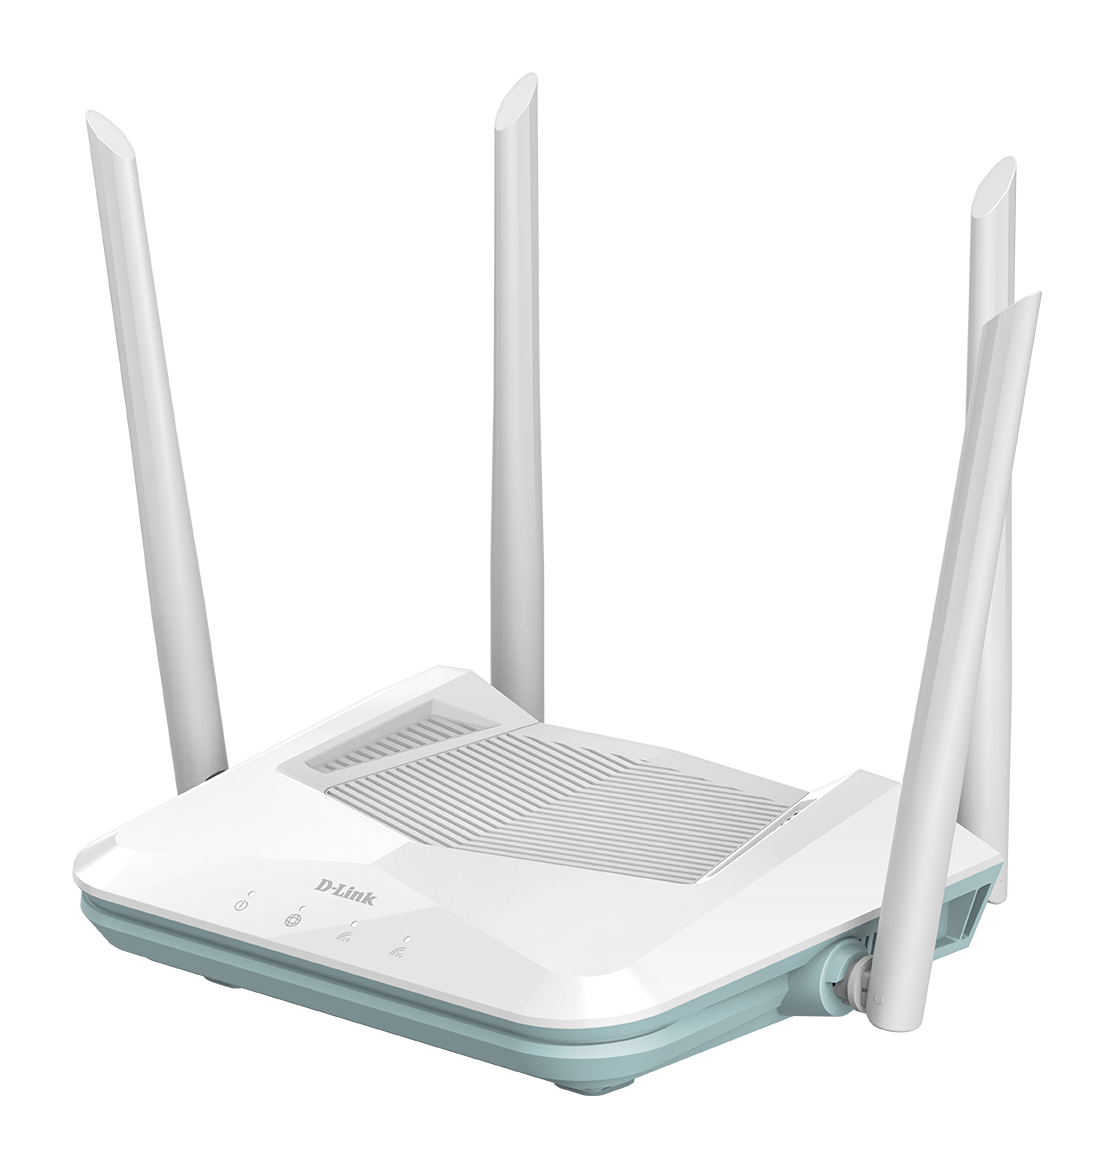  WIRELESS ROUTER D-LINK R15 - CHUẨN AX 1500MBPS - WIFI 6 